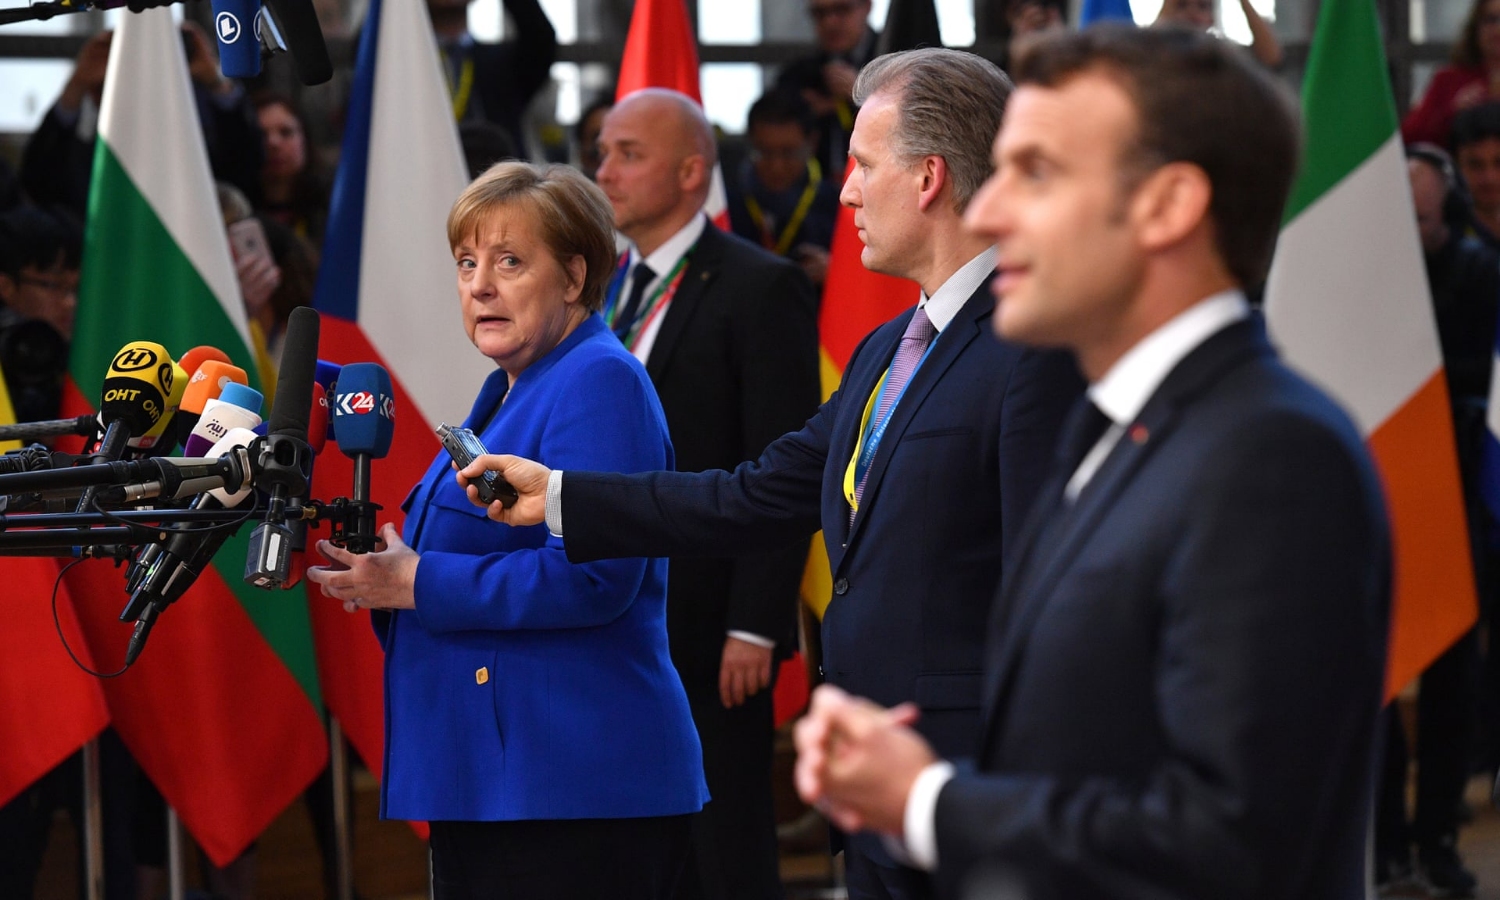 The German chancellor, Angela Merkel, looking at the French president, Emmanuel Macron, as they both conduct media interviews on arrival at the summit. Photograph: Leon Neal/Getty Images